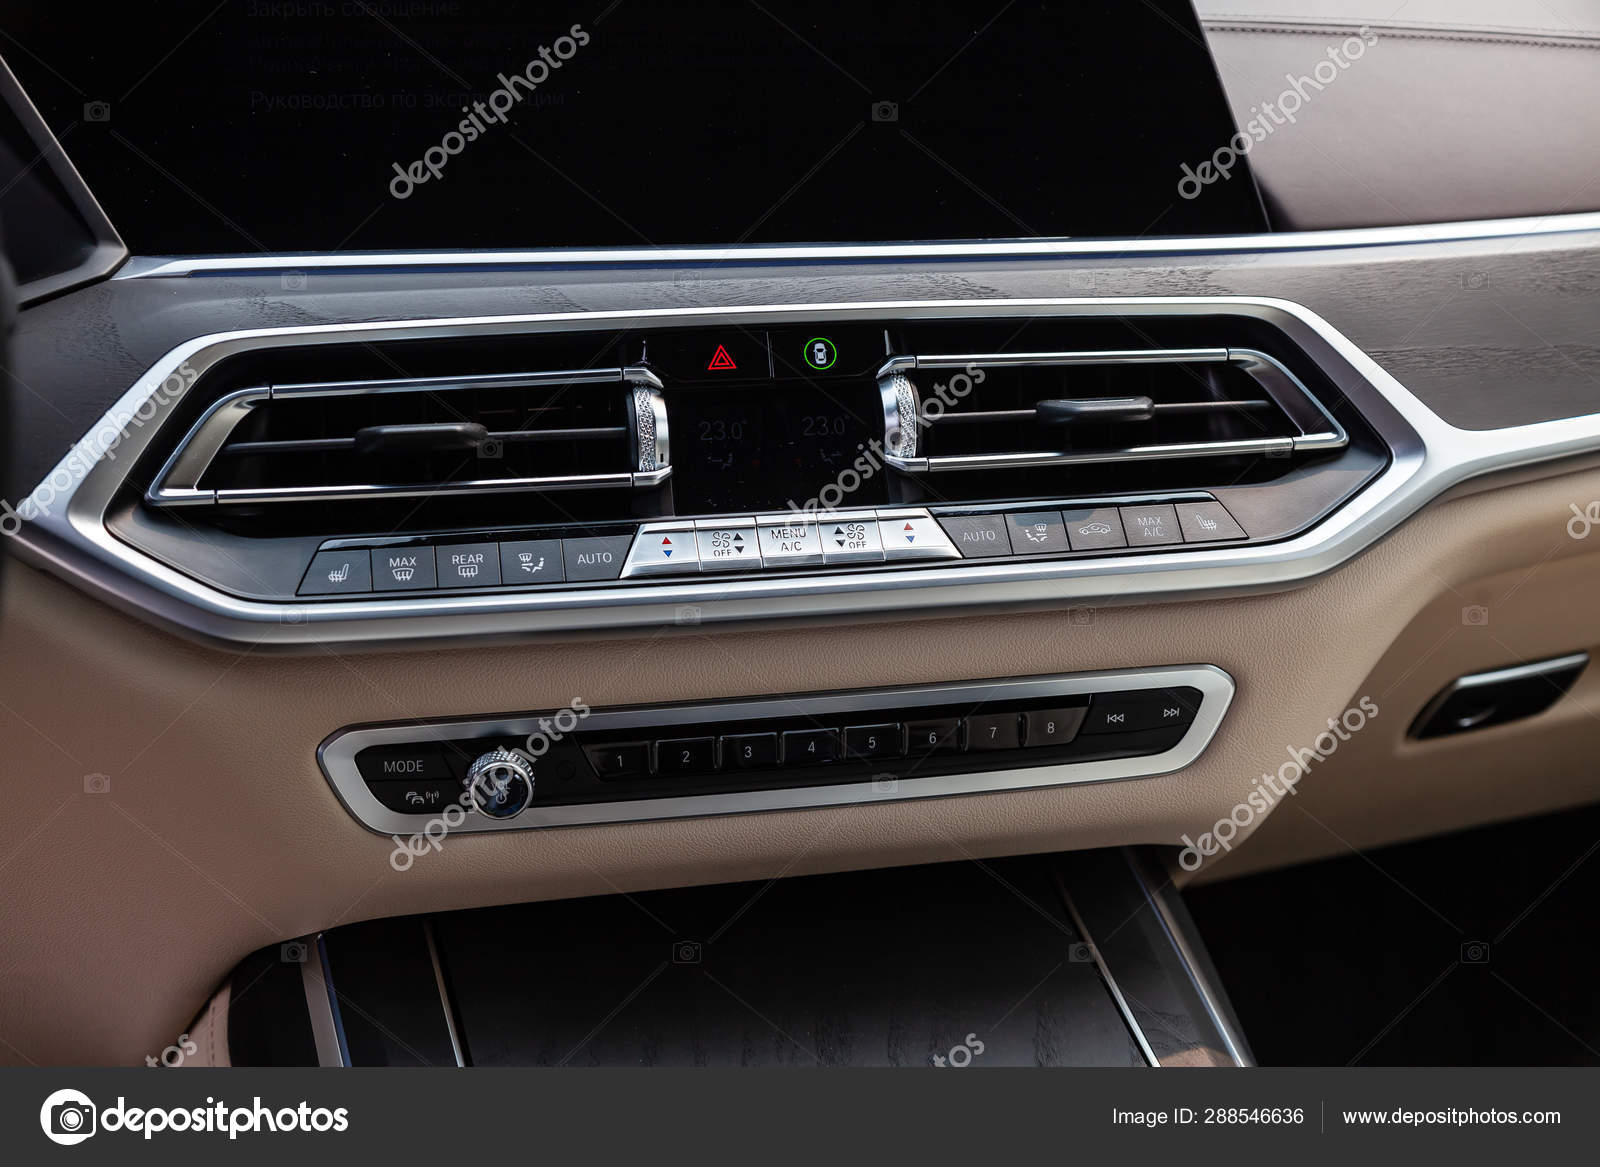 View To The White And Brown Interior Of Car With Dashboard